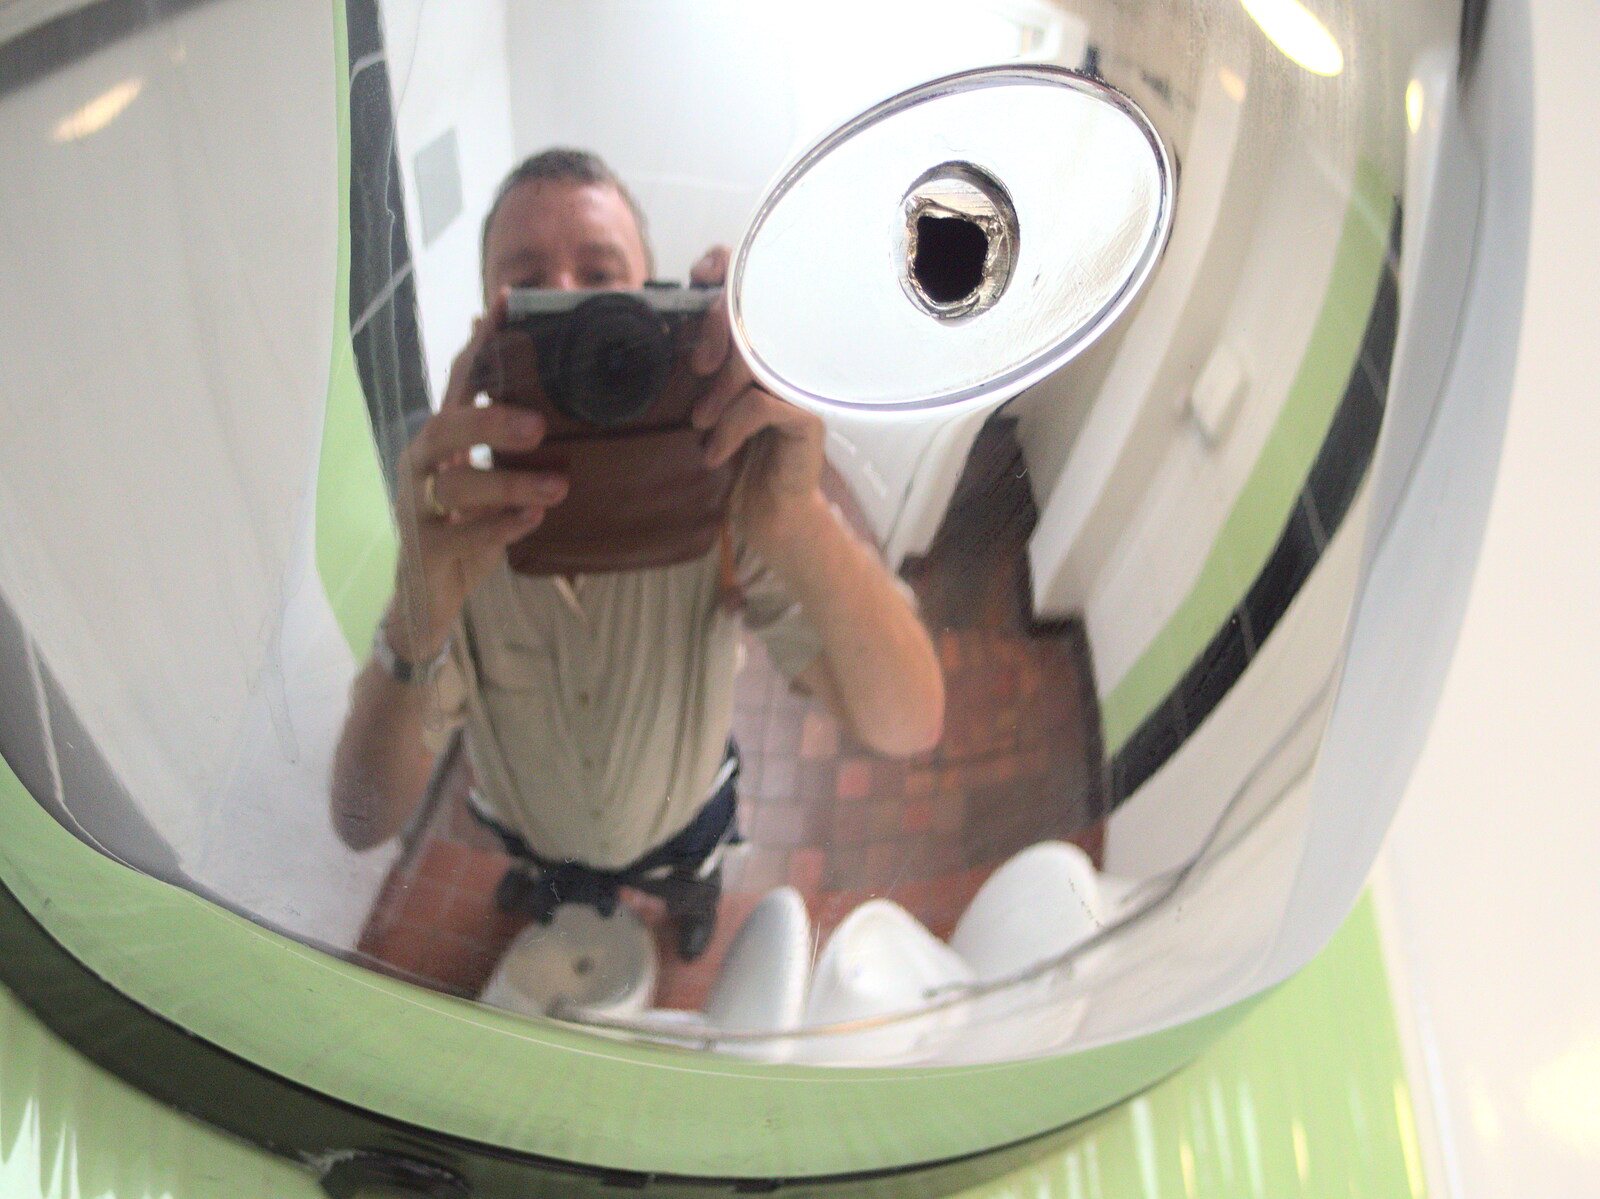 Camping in West Runton, North Norfolk - 30th July 2016: Nosher does a selfie in the bogs